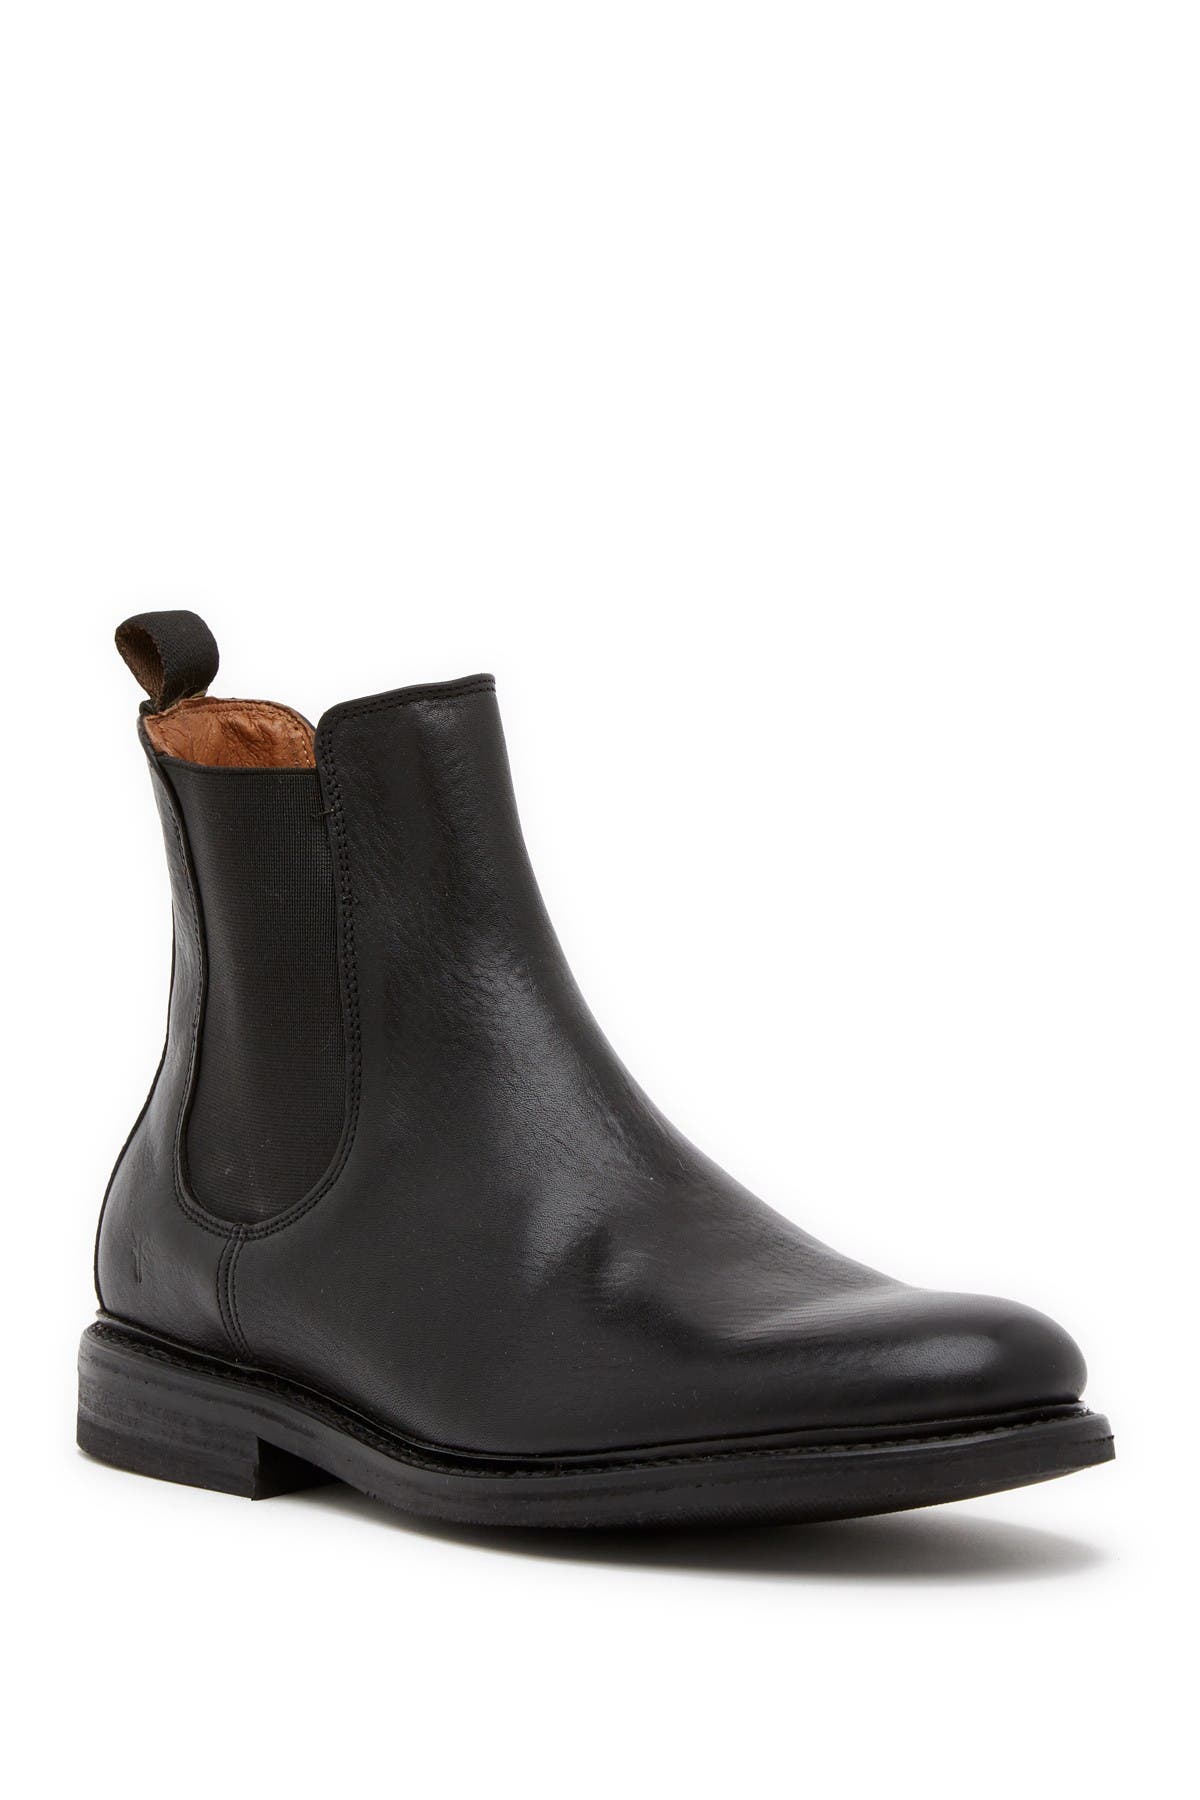 seth leather chelsea boot